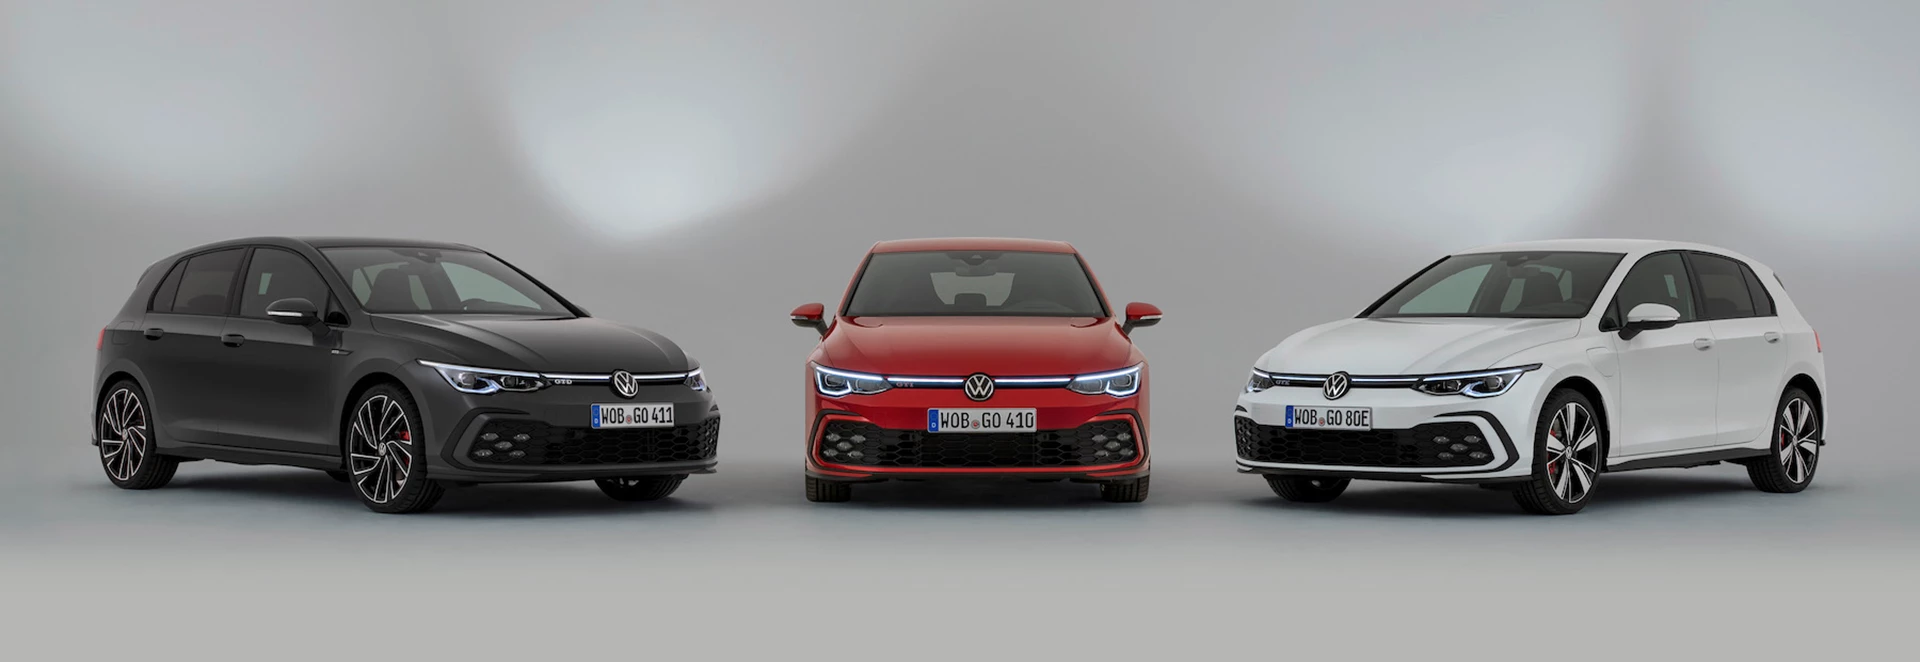 Volkswagen Golf hot hatches: Here’s what’s on offer 